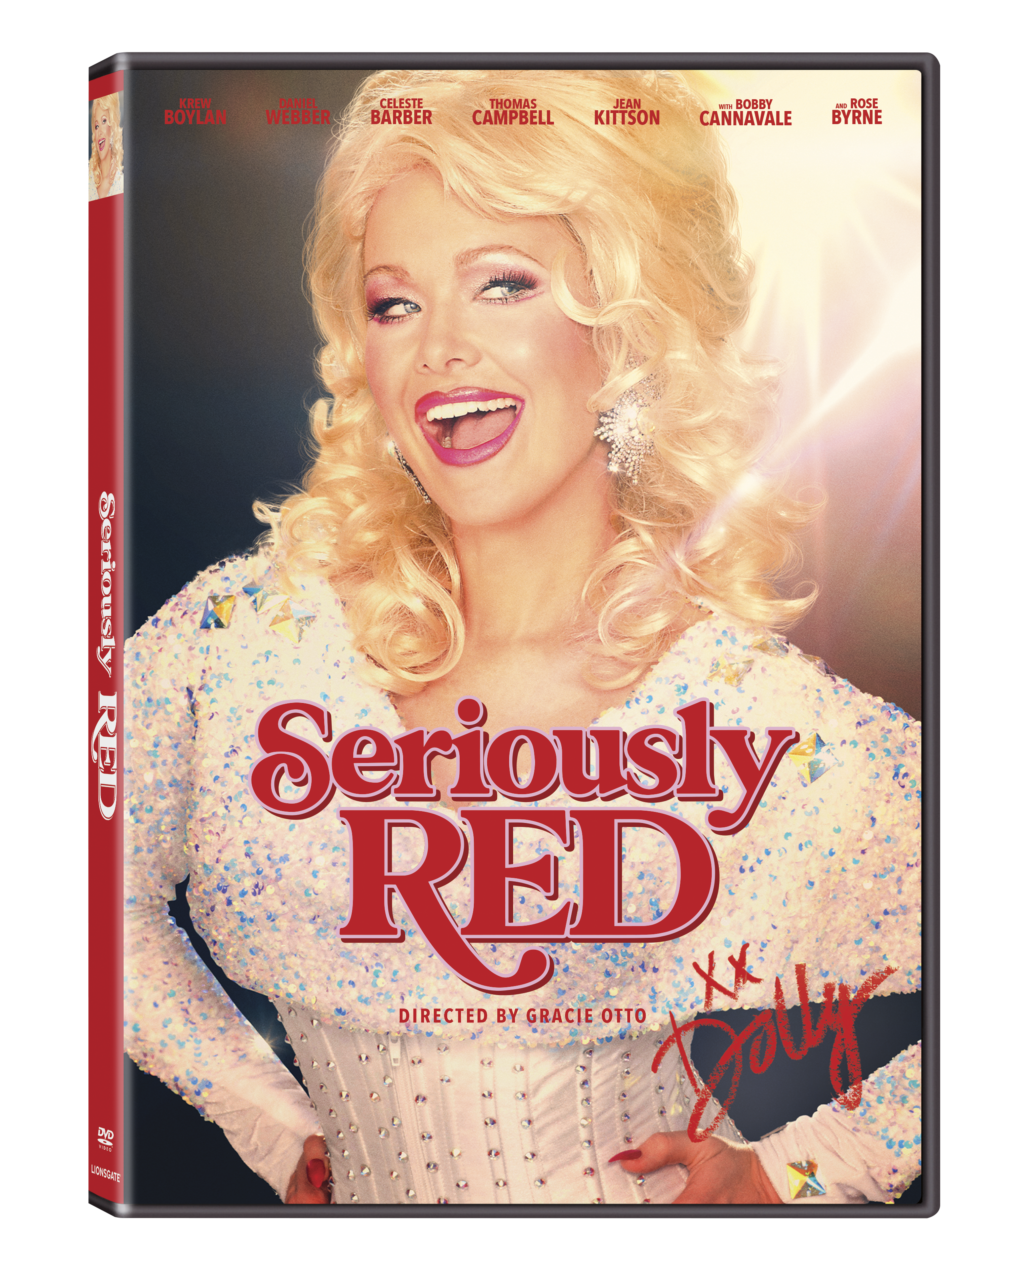 Seriously Red DVD cover (Lionsgate)